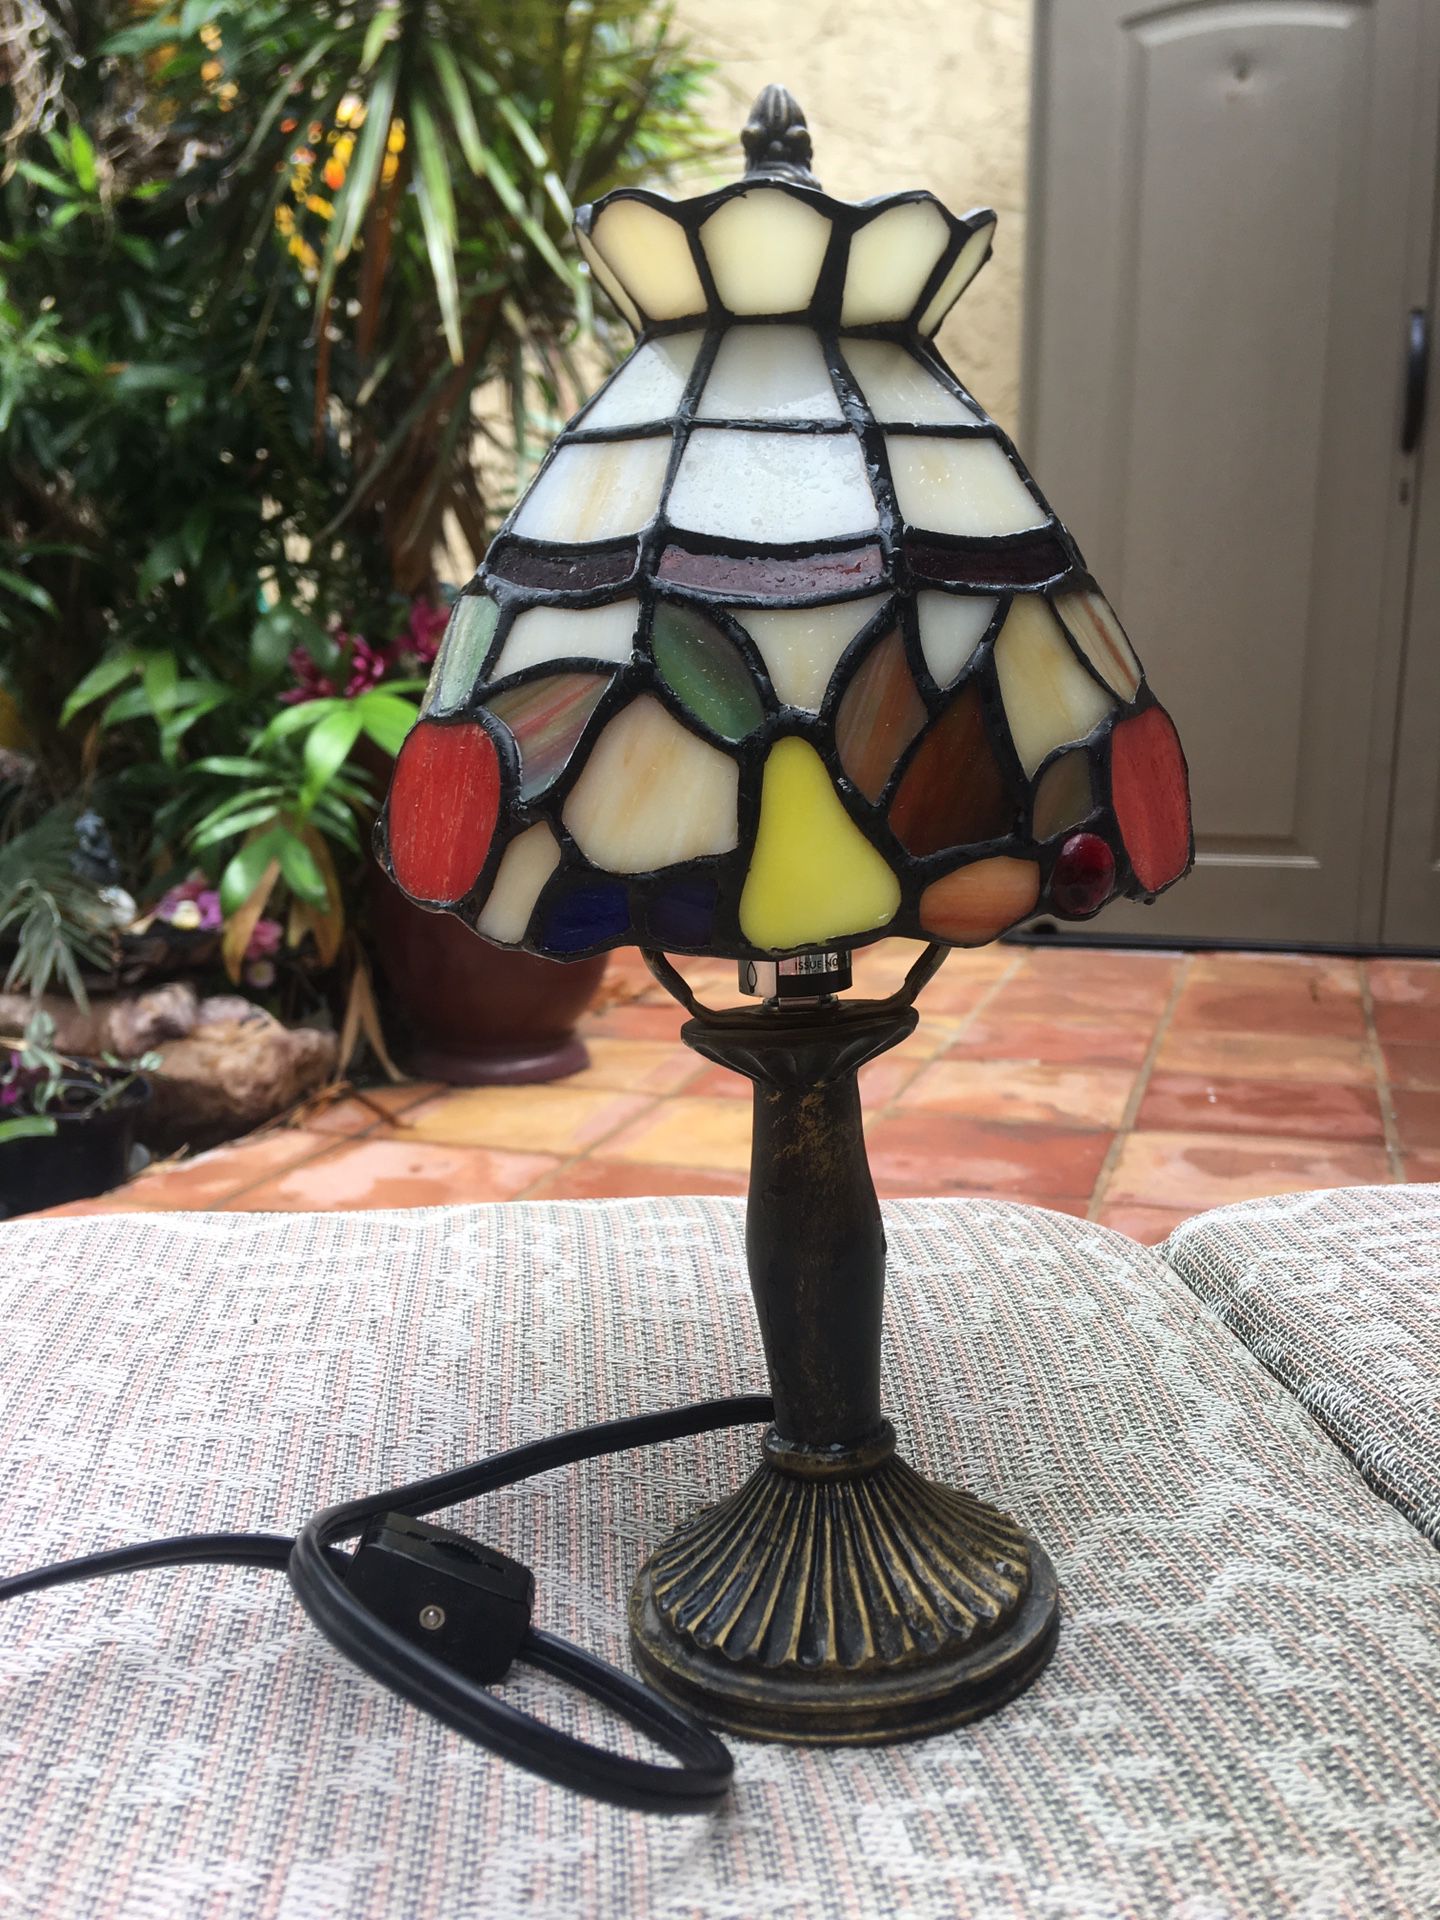 Multicolored REAL (not plastic) stained glass lamp... nightlight